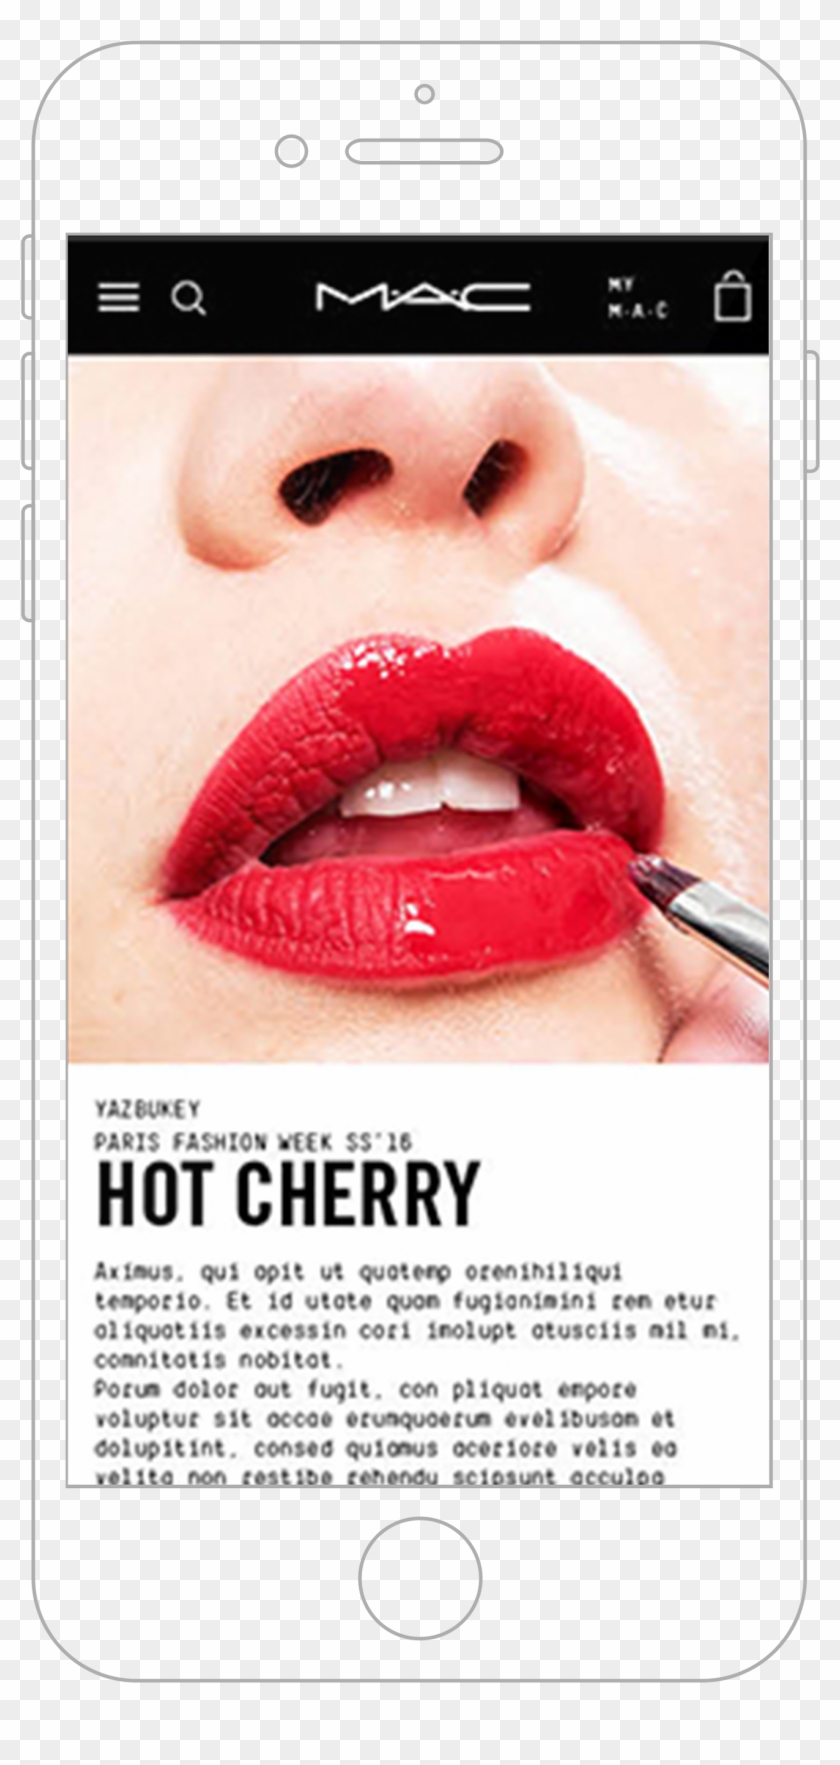 Landing Page Designed For Fashion Week Make-up Trends - Mac Cosmetics Clipart #3424297